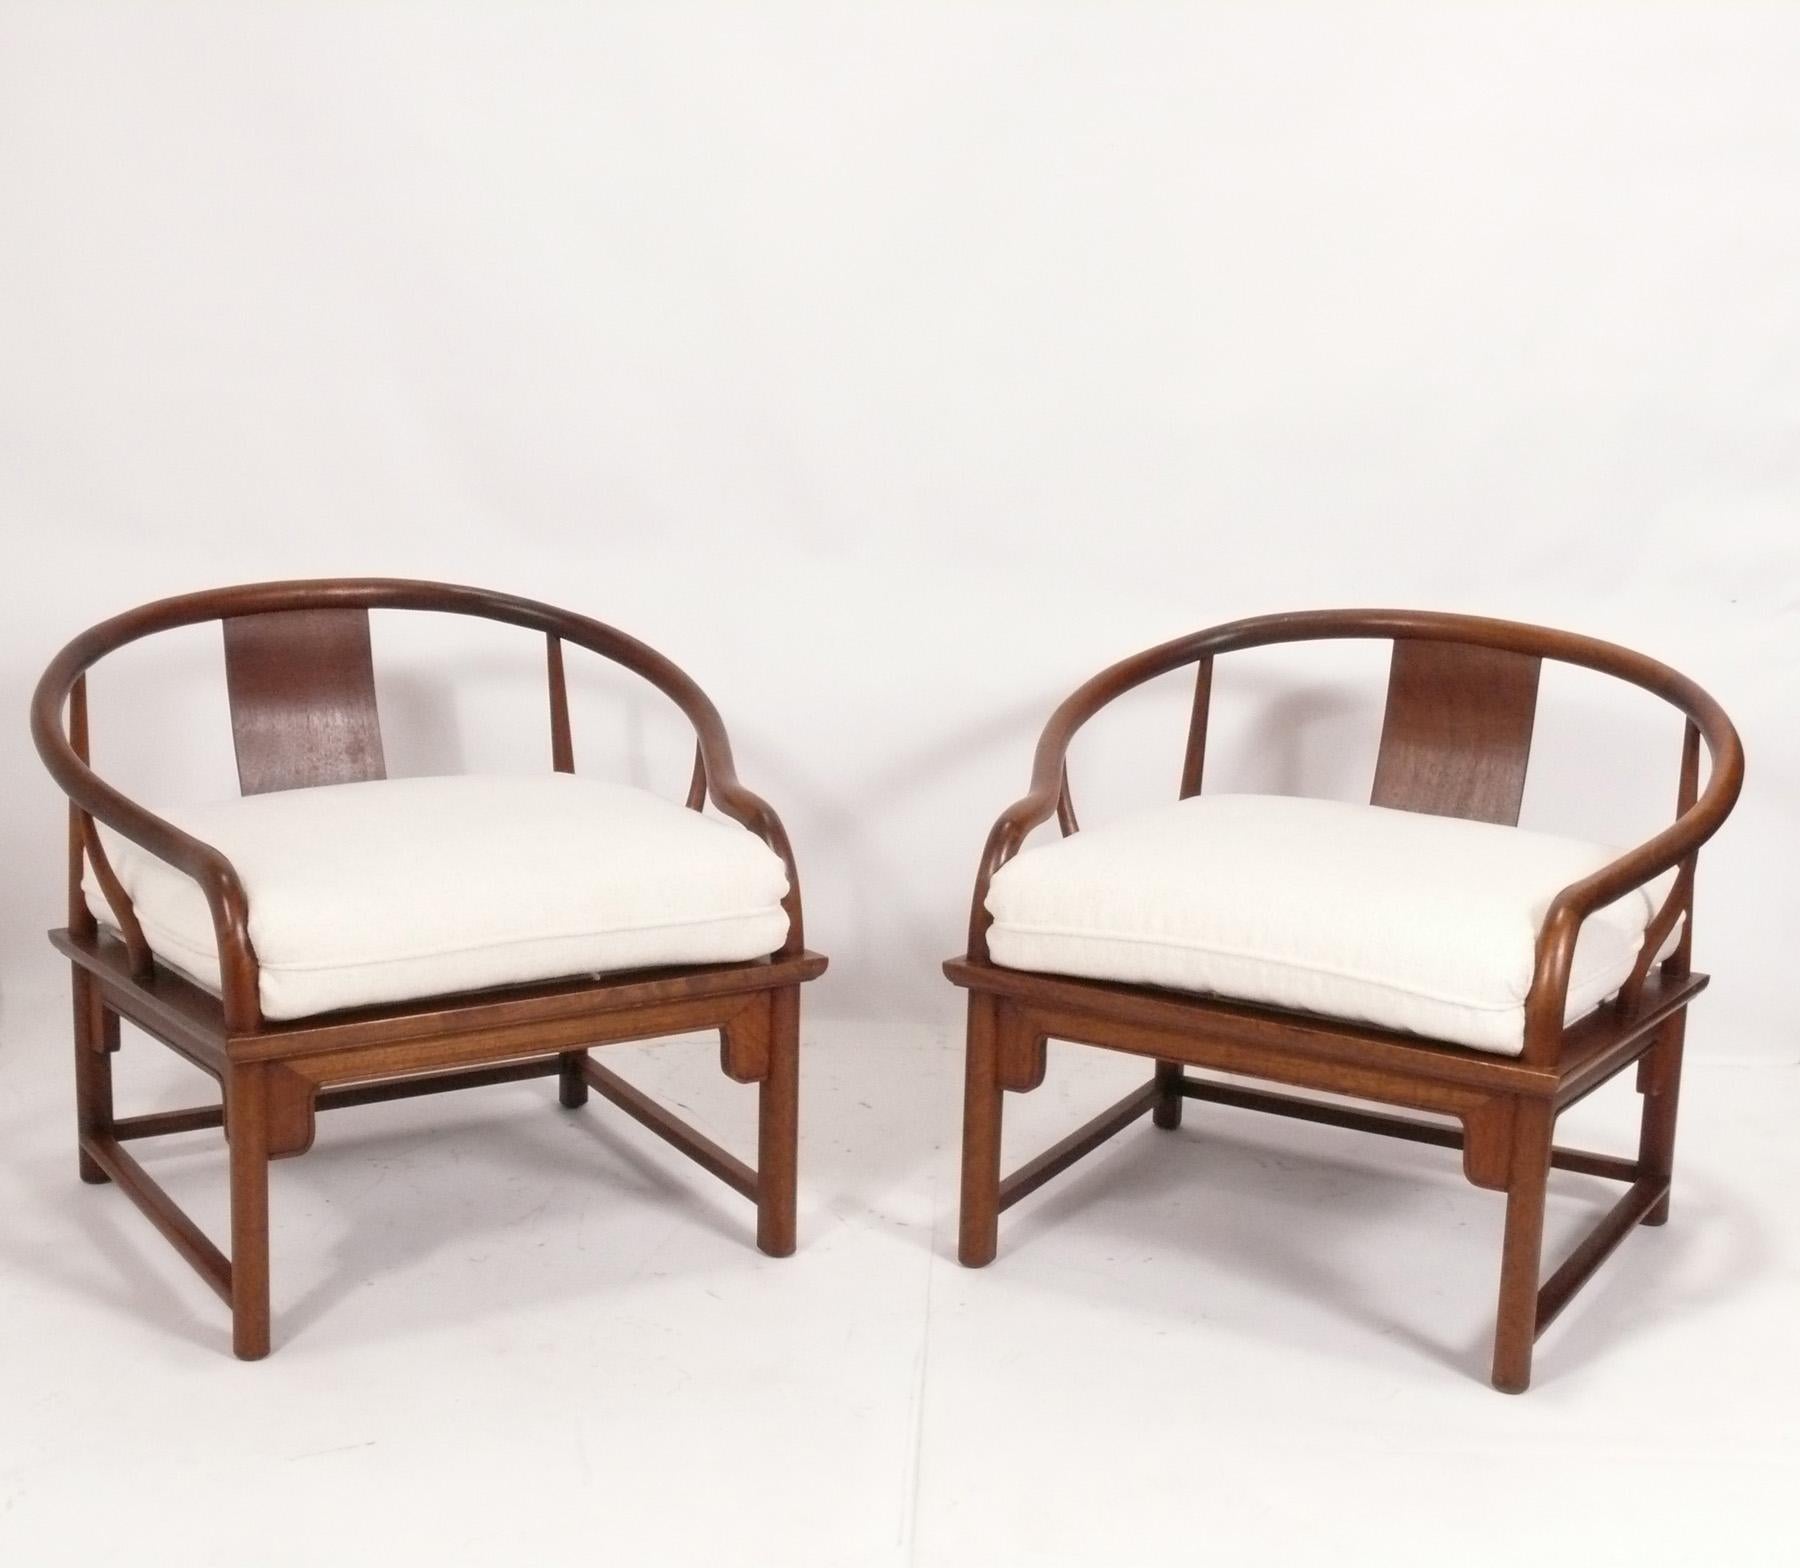 Curvaceous Pair of Asian Inspired Chairs, designed by Michael Taylor for Baker's Far East Line, American, circa 1960s. Signed with Baker tag underneath. They have been recently reupholstered in a plush ivory color boucle. 